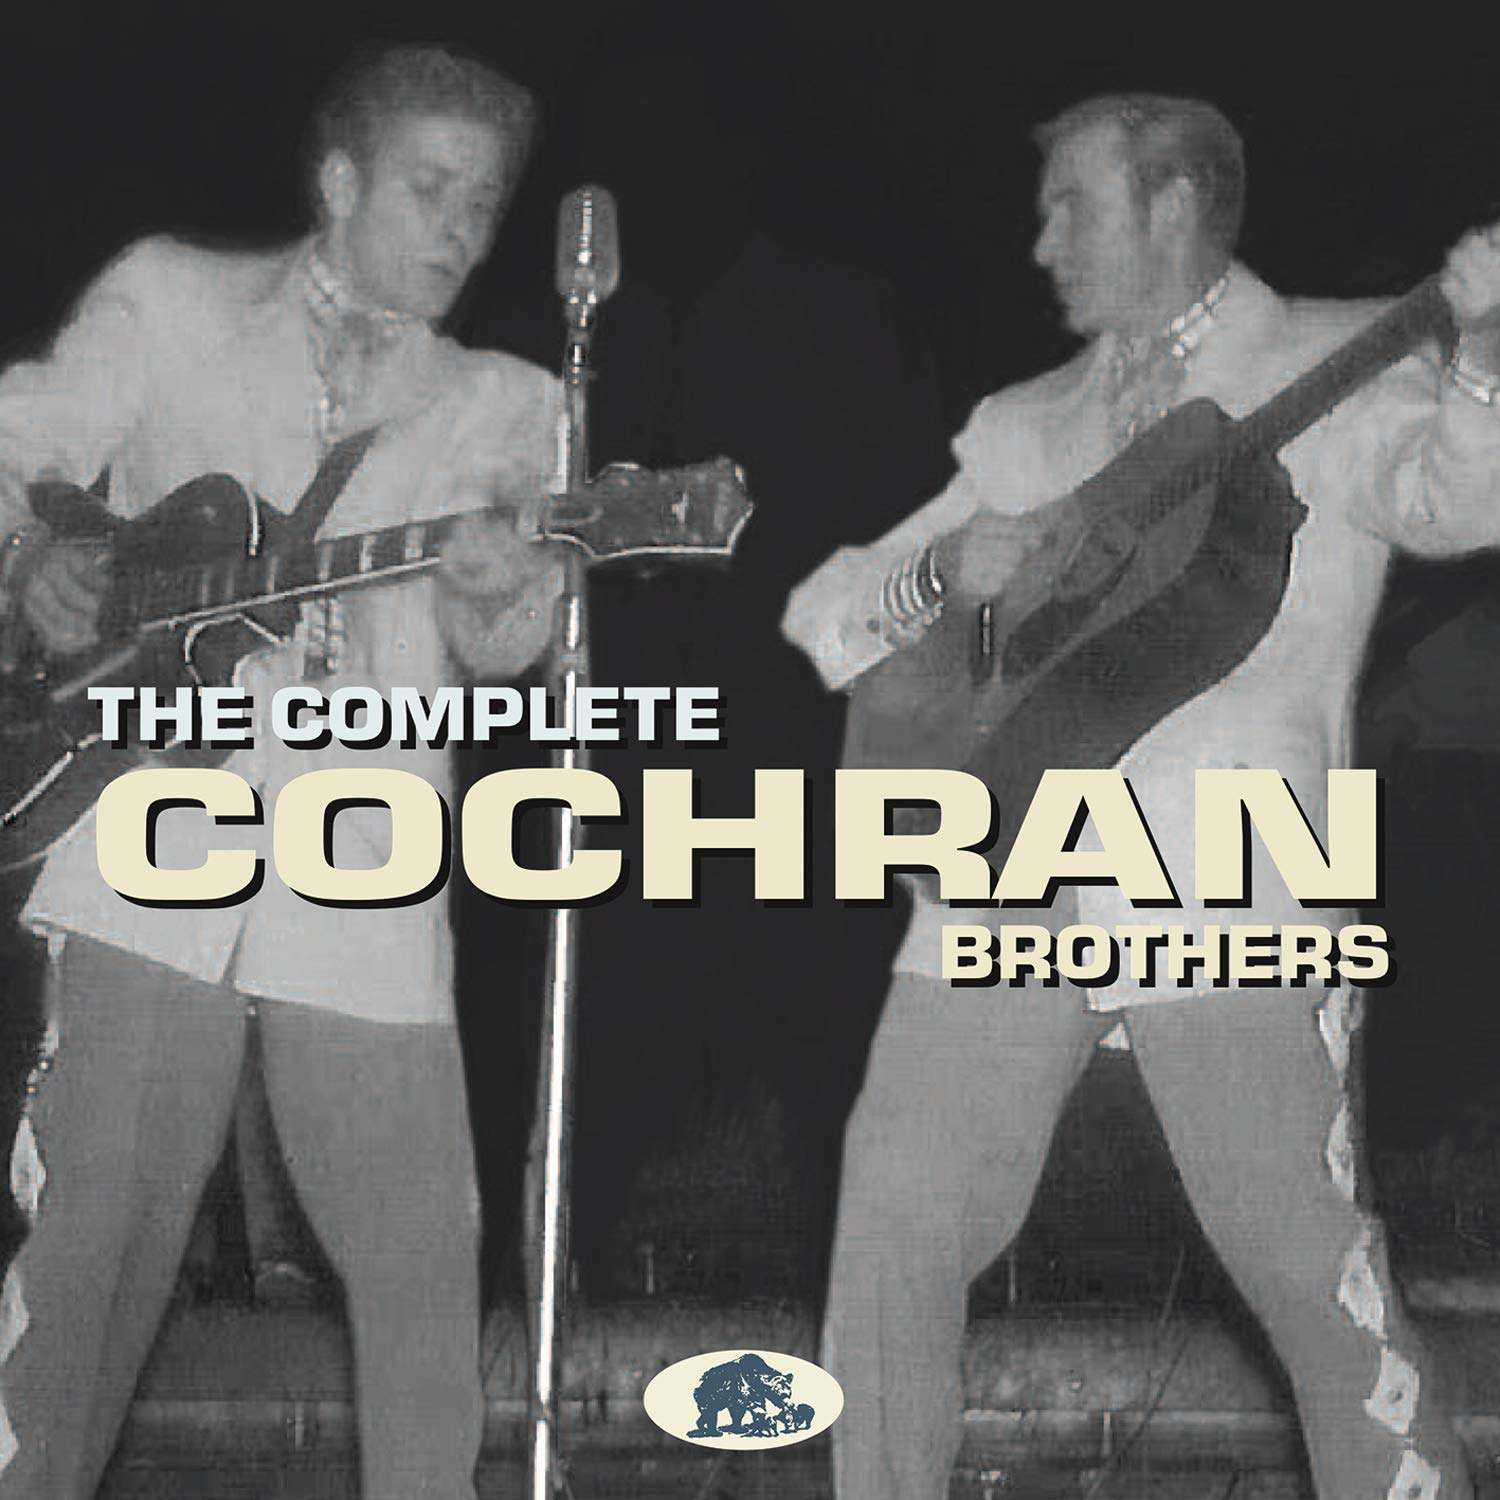 COCHRAN BROTHERS / COMPLETE COCHRAN BROTHERS